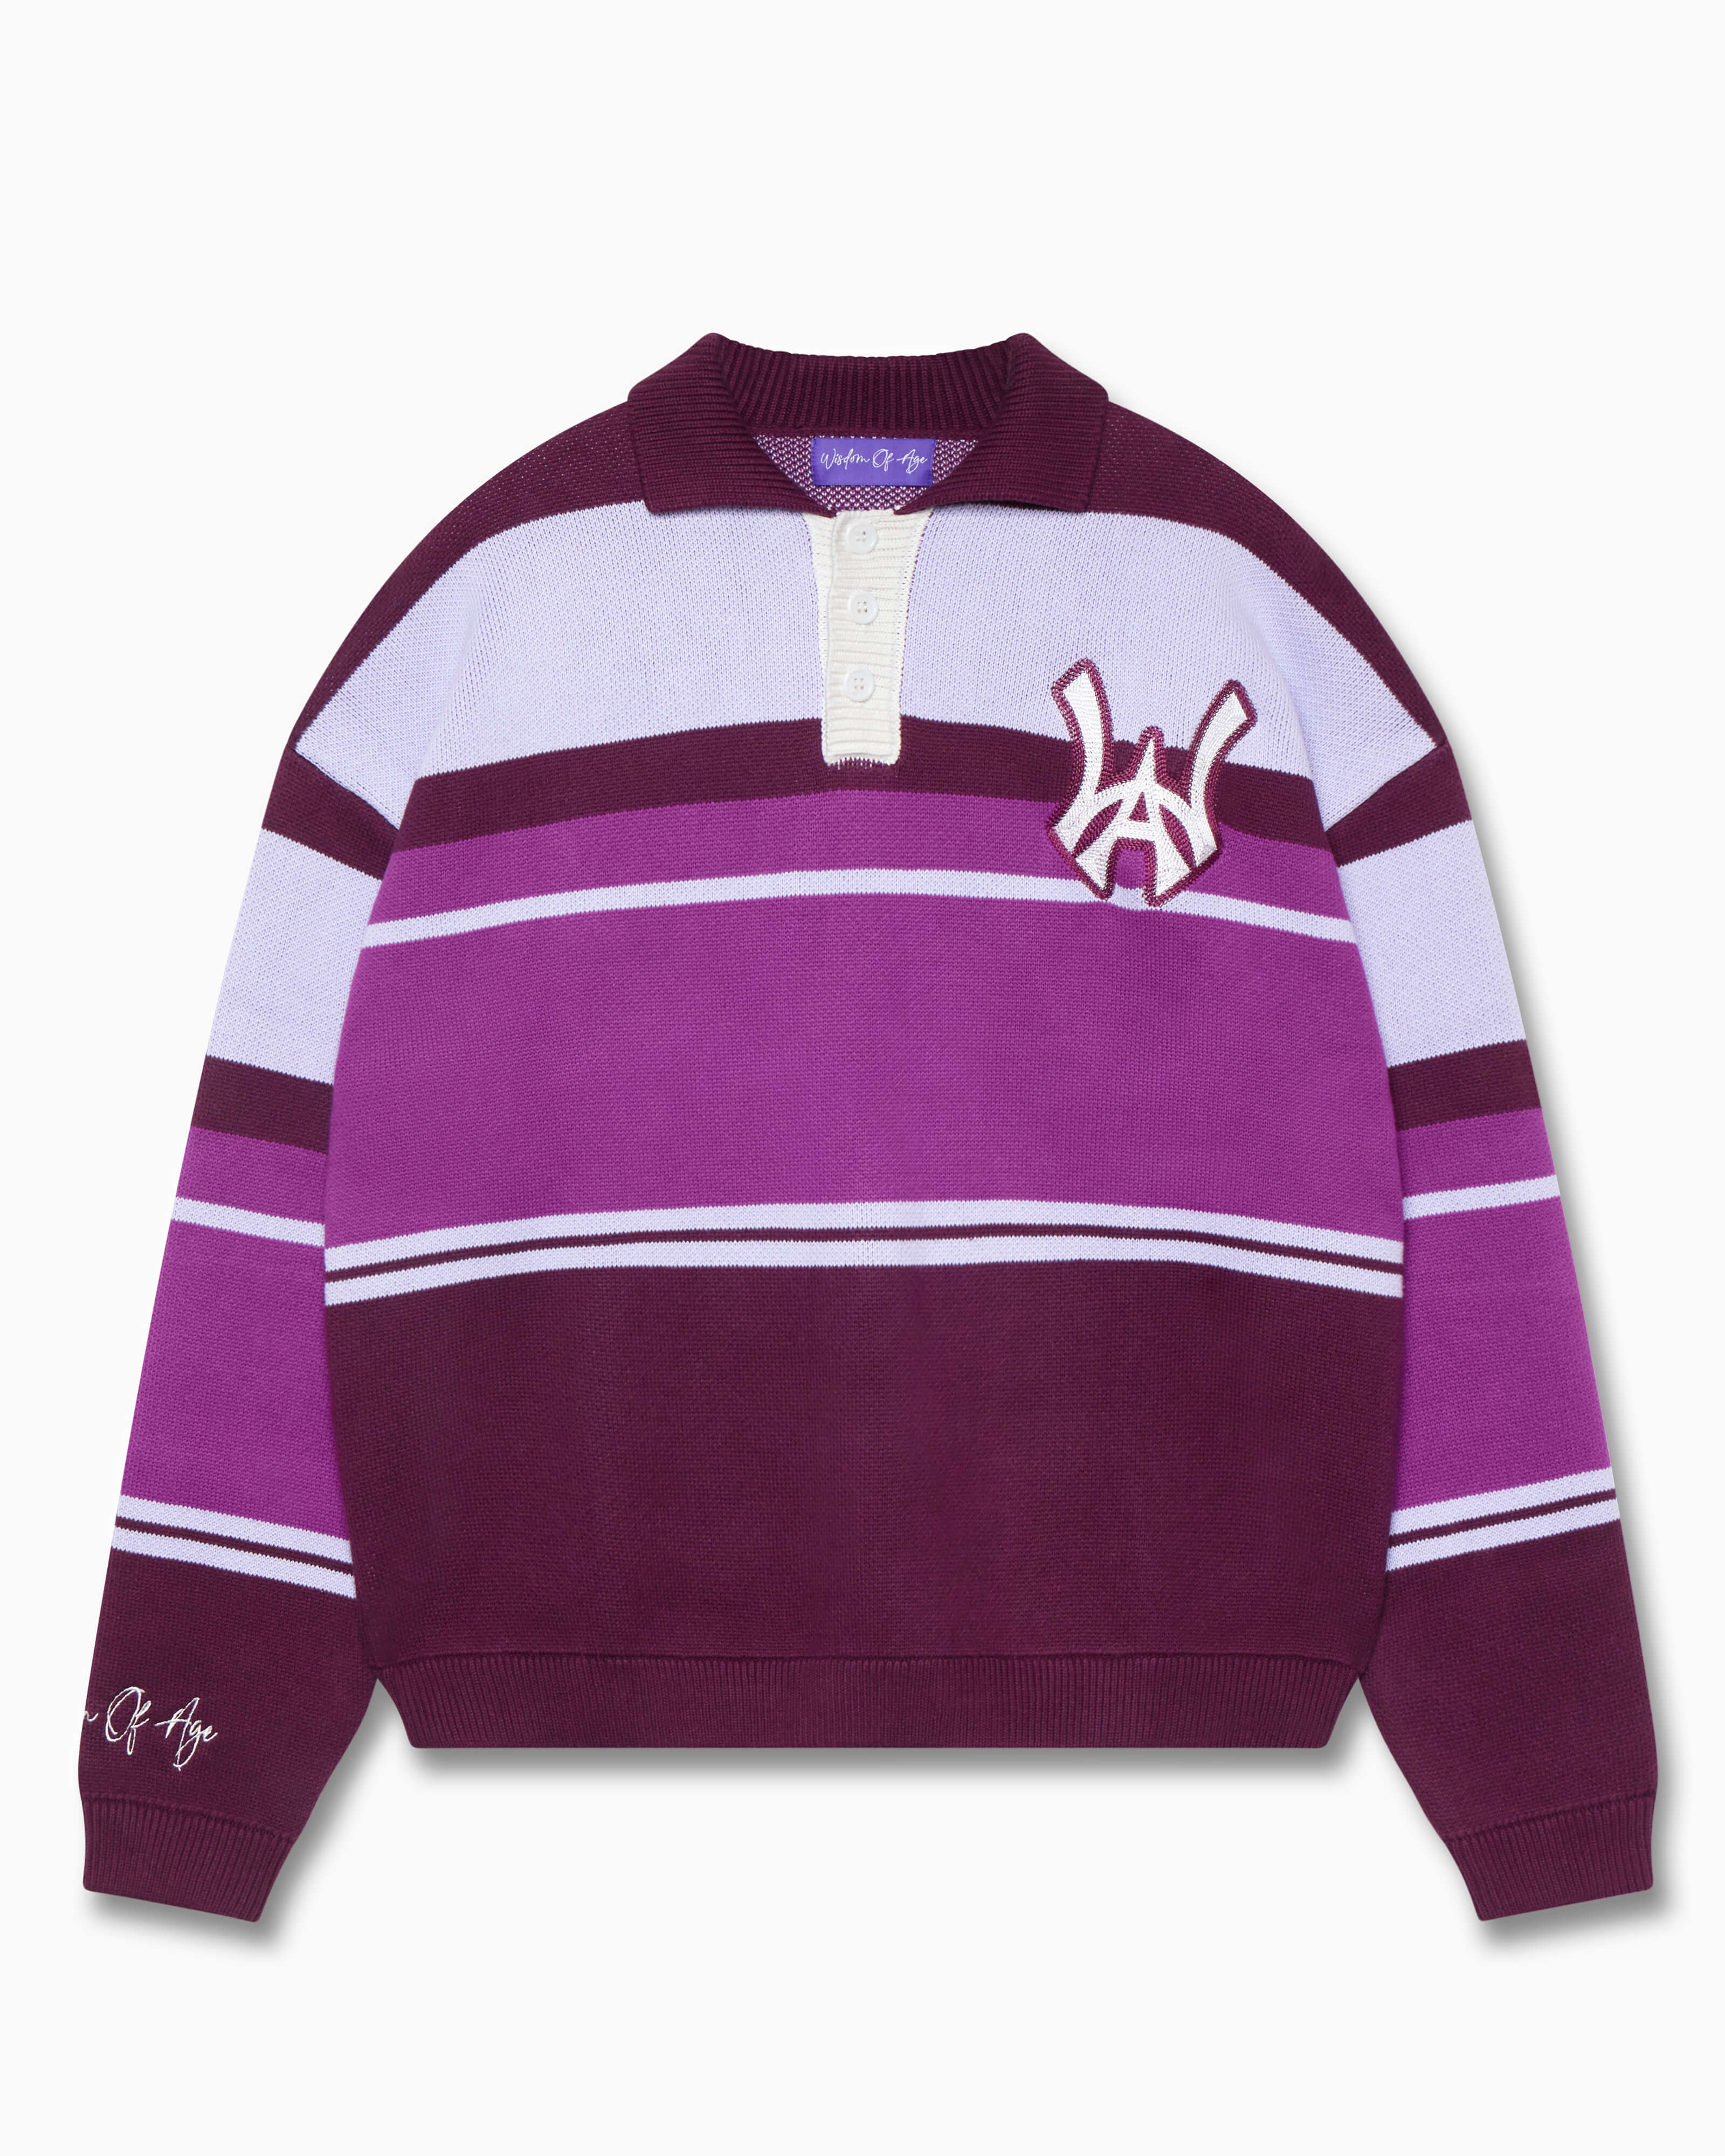 Wisdom of Age Purple Striped Rugby Sweater, purple swatches of berry, wine, and lilac with WOA symbol on the top left side of the chest